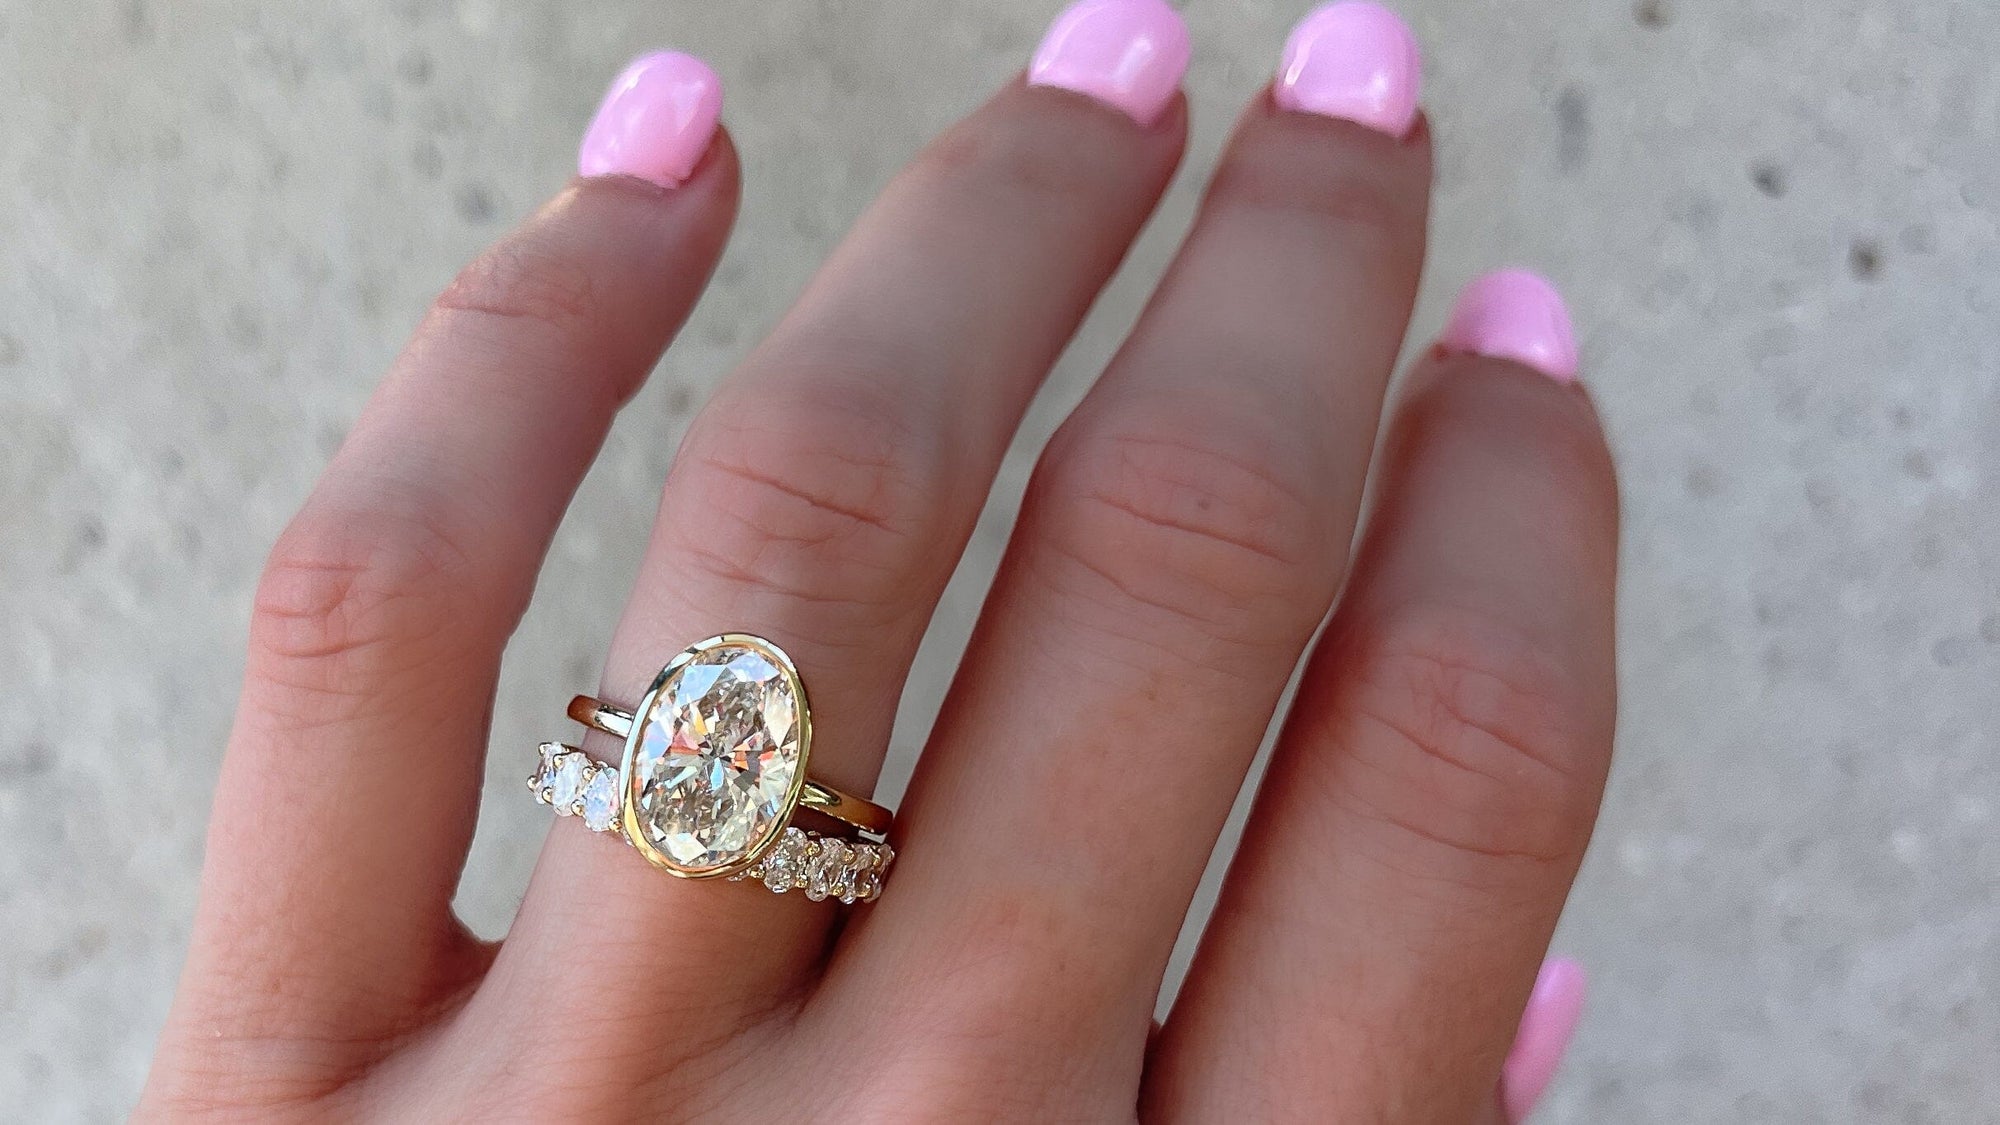 Do you wear your engagement ring on your wedding day? - Shining